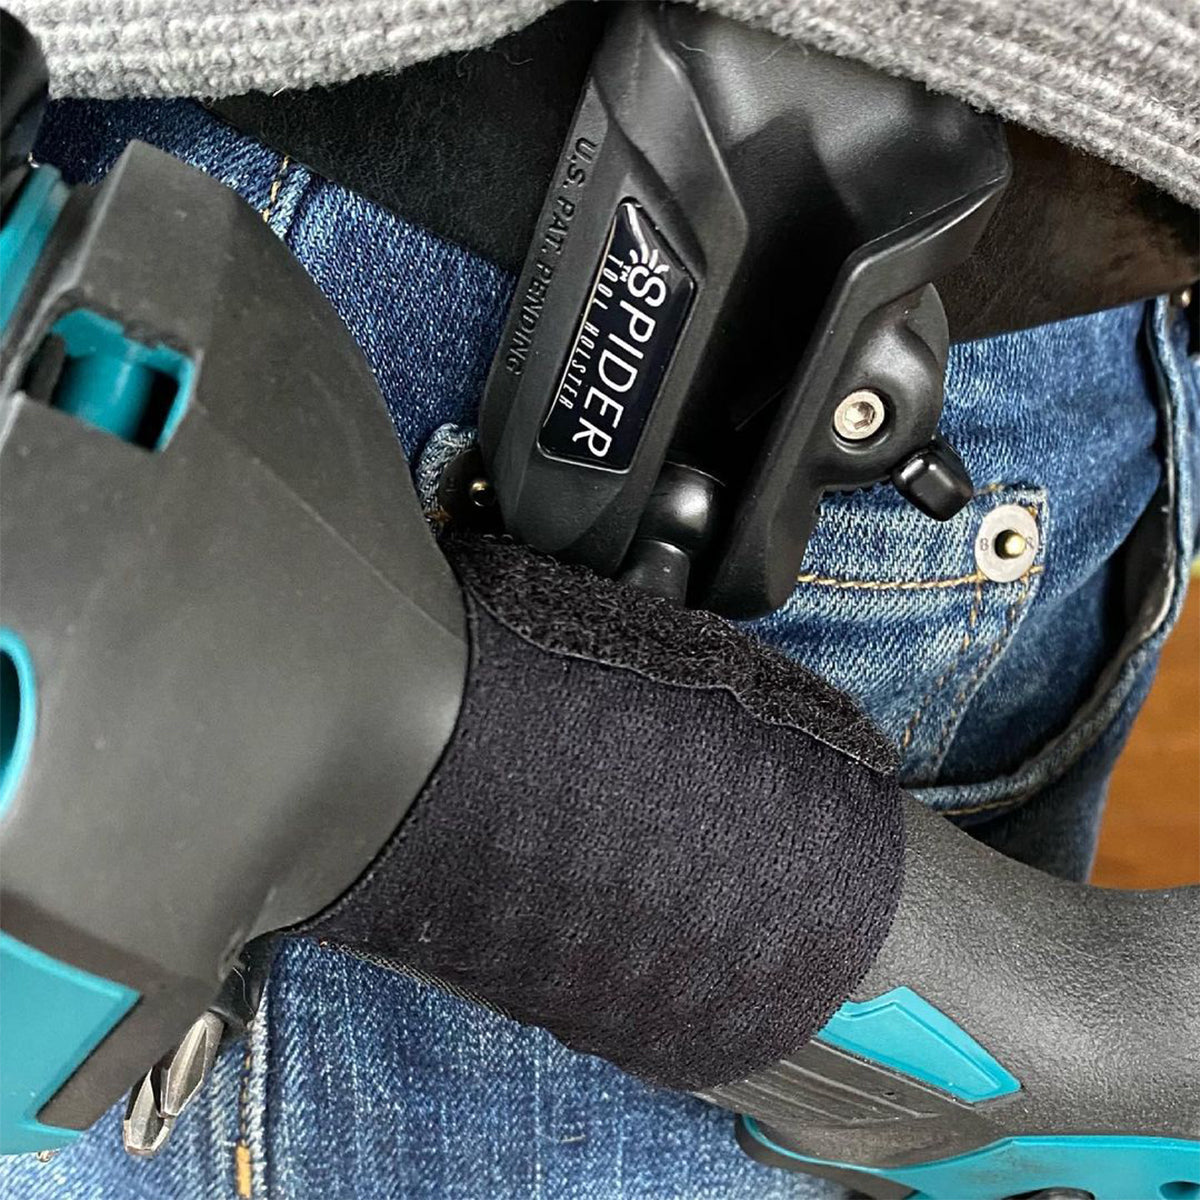 5500TH: Tool Holster